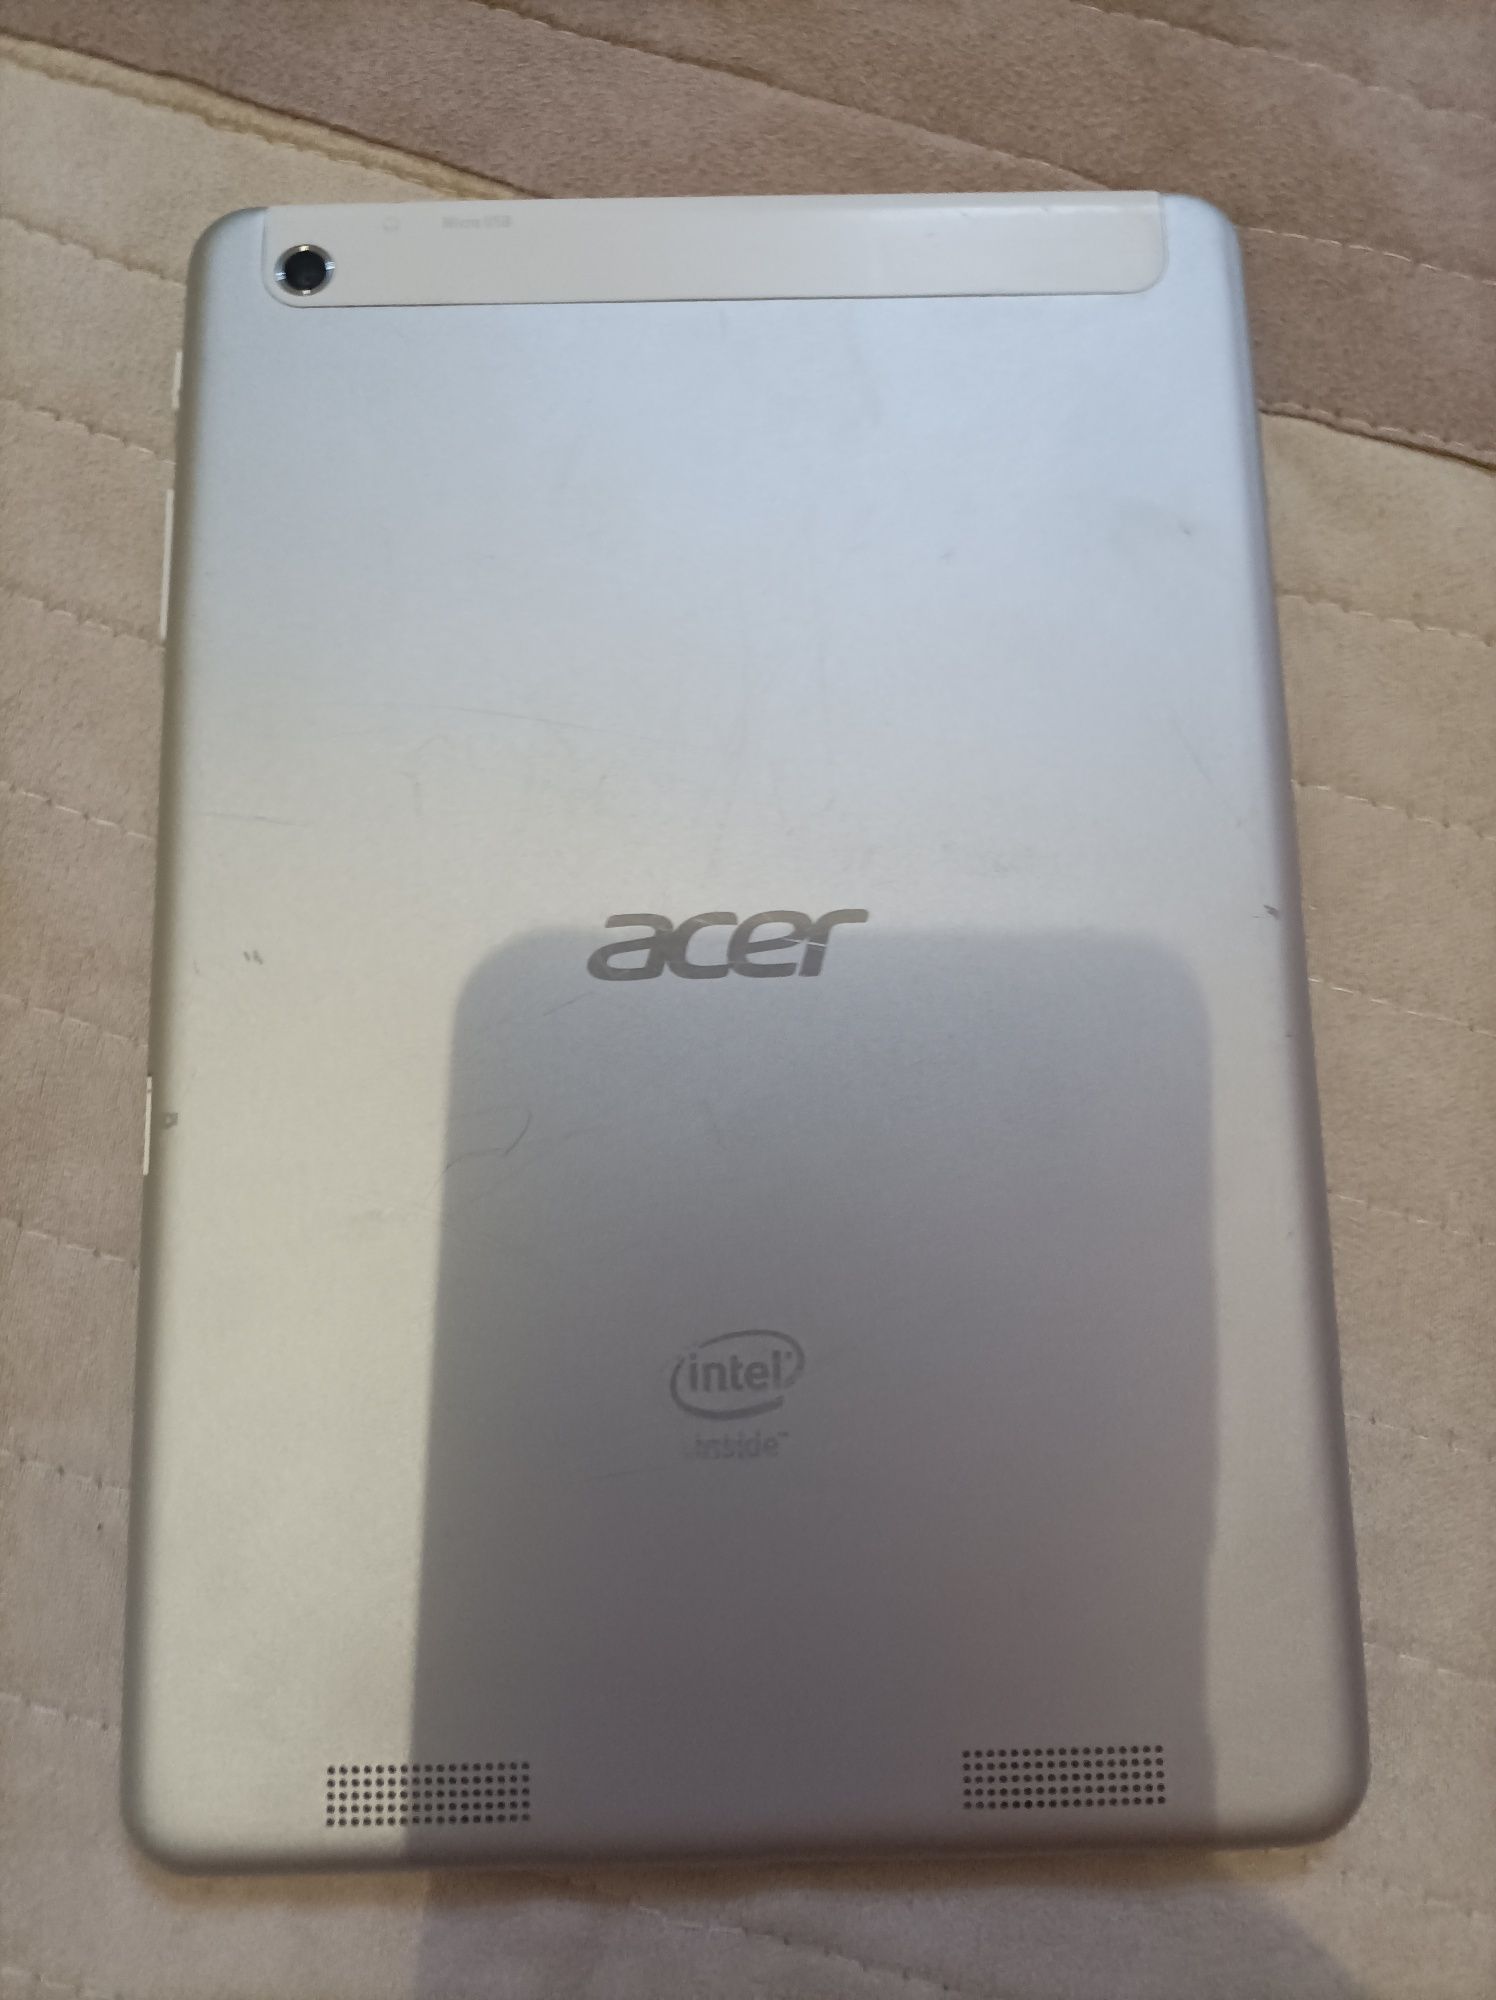 Acer lconia A 1 -830 16 GB